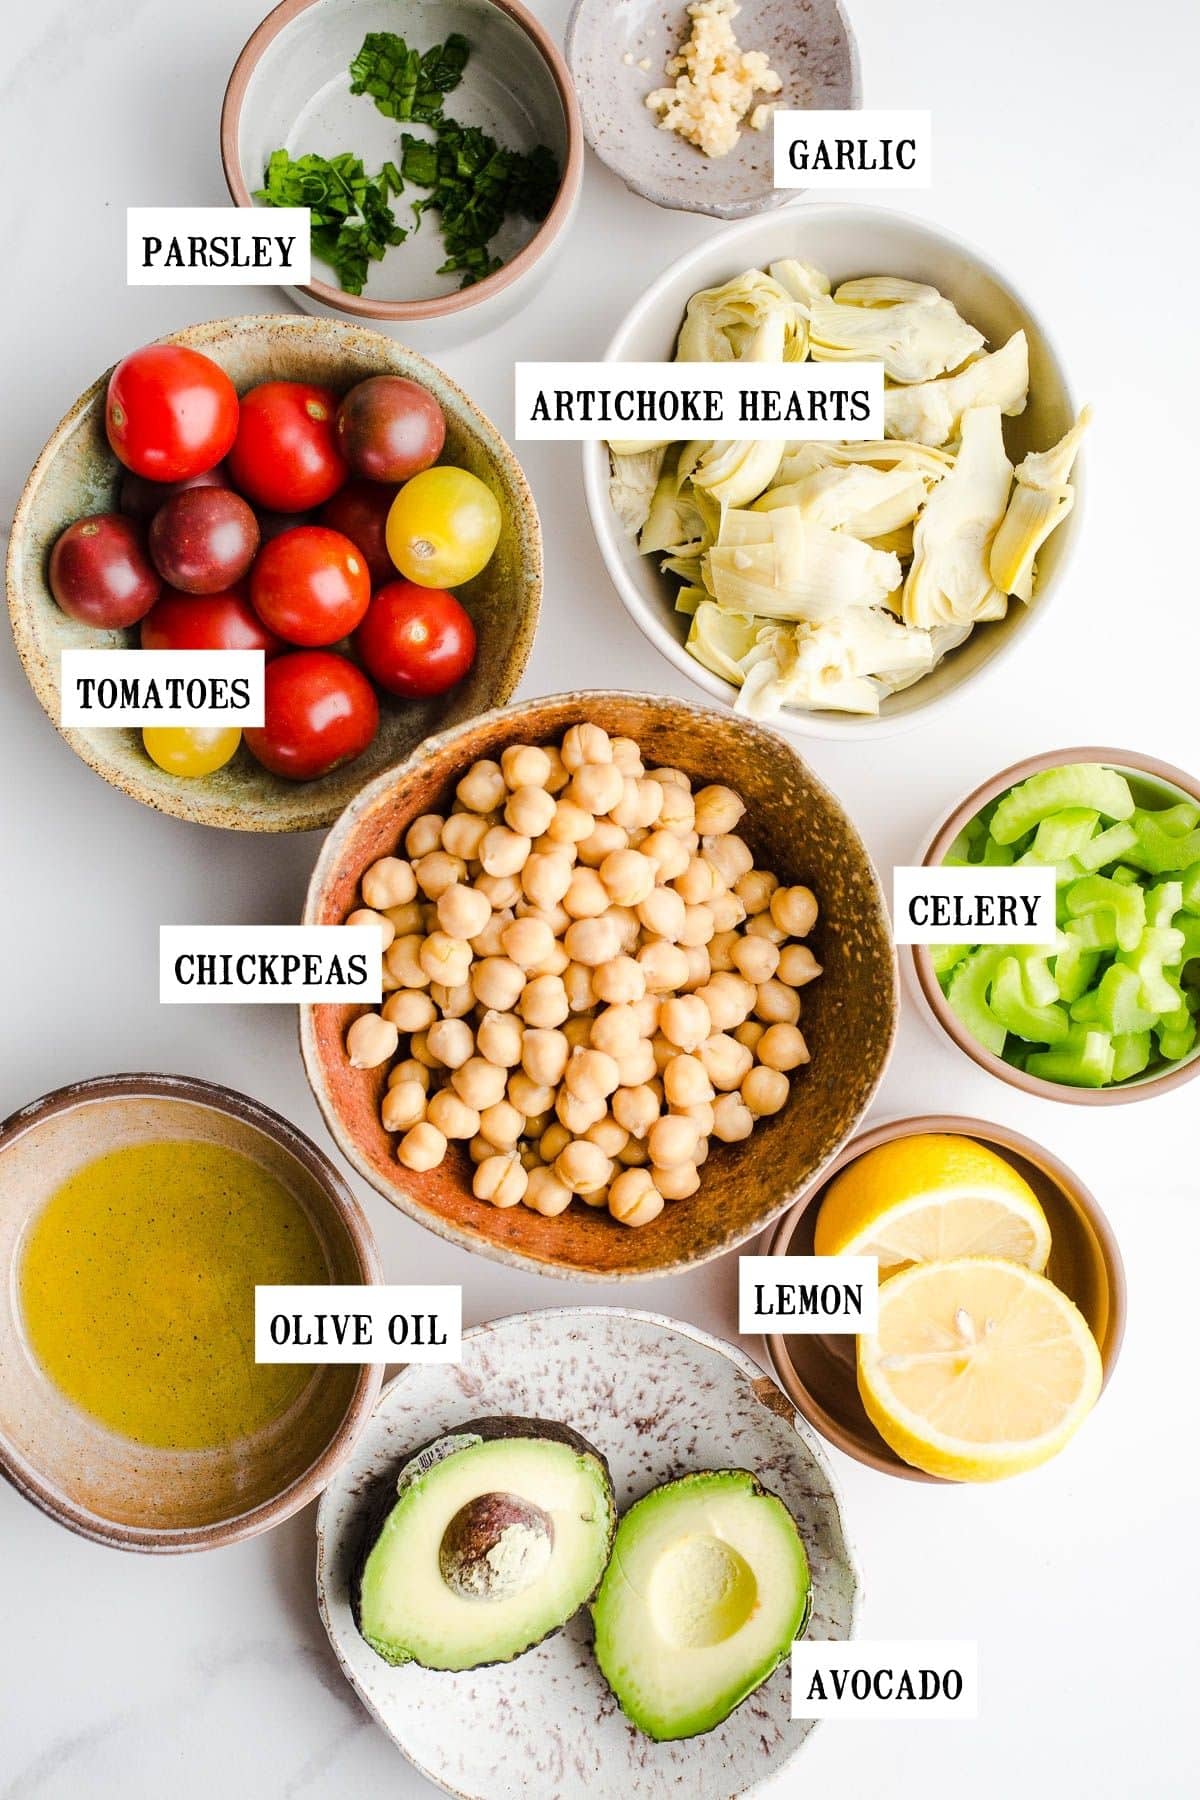 Ingredients to make a garbanzo bean salad in small bowls.